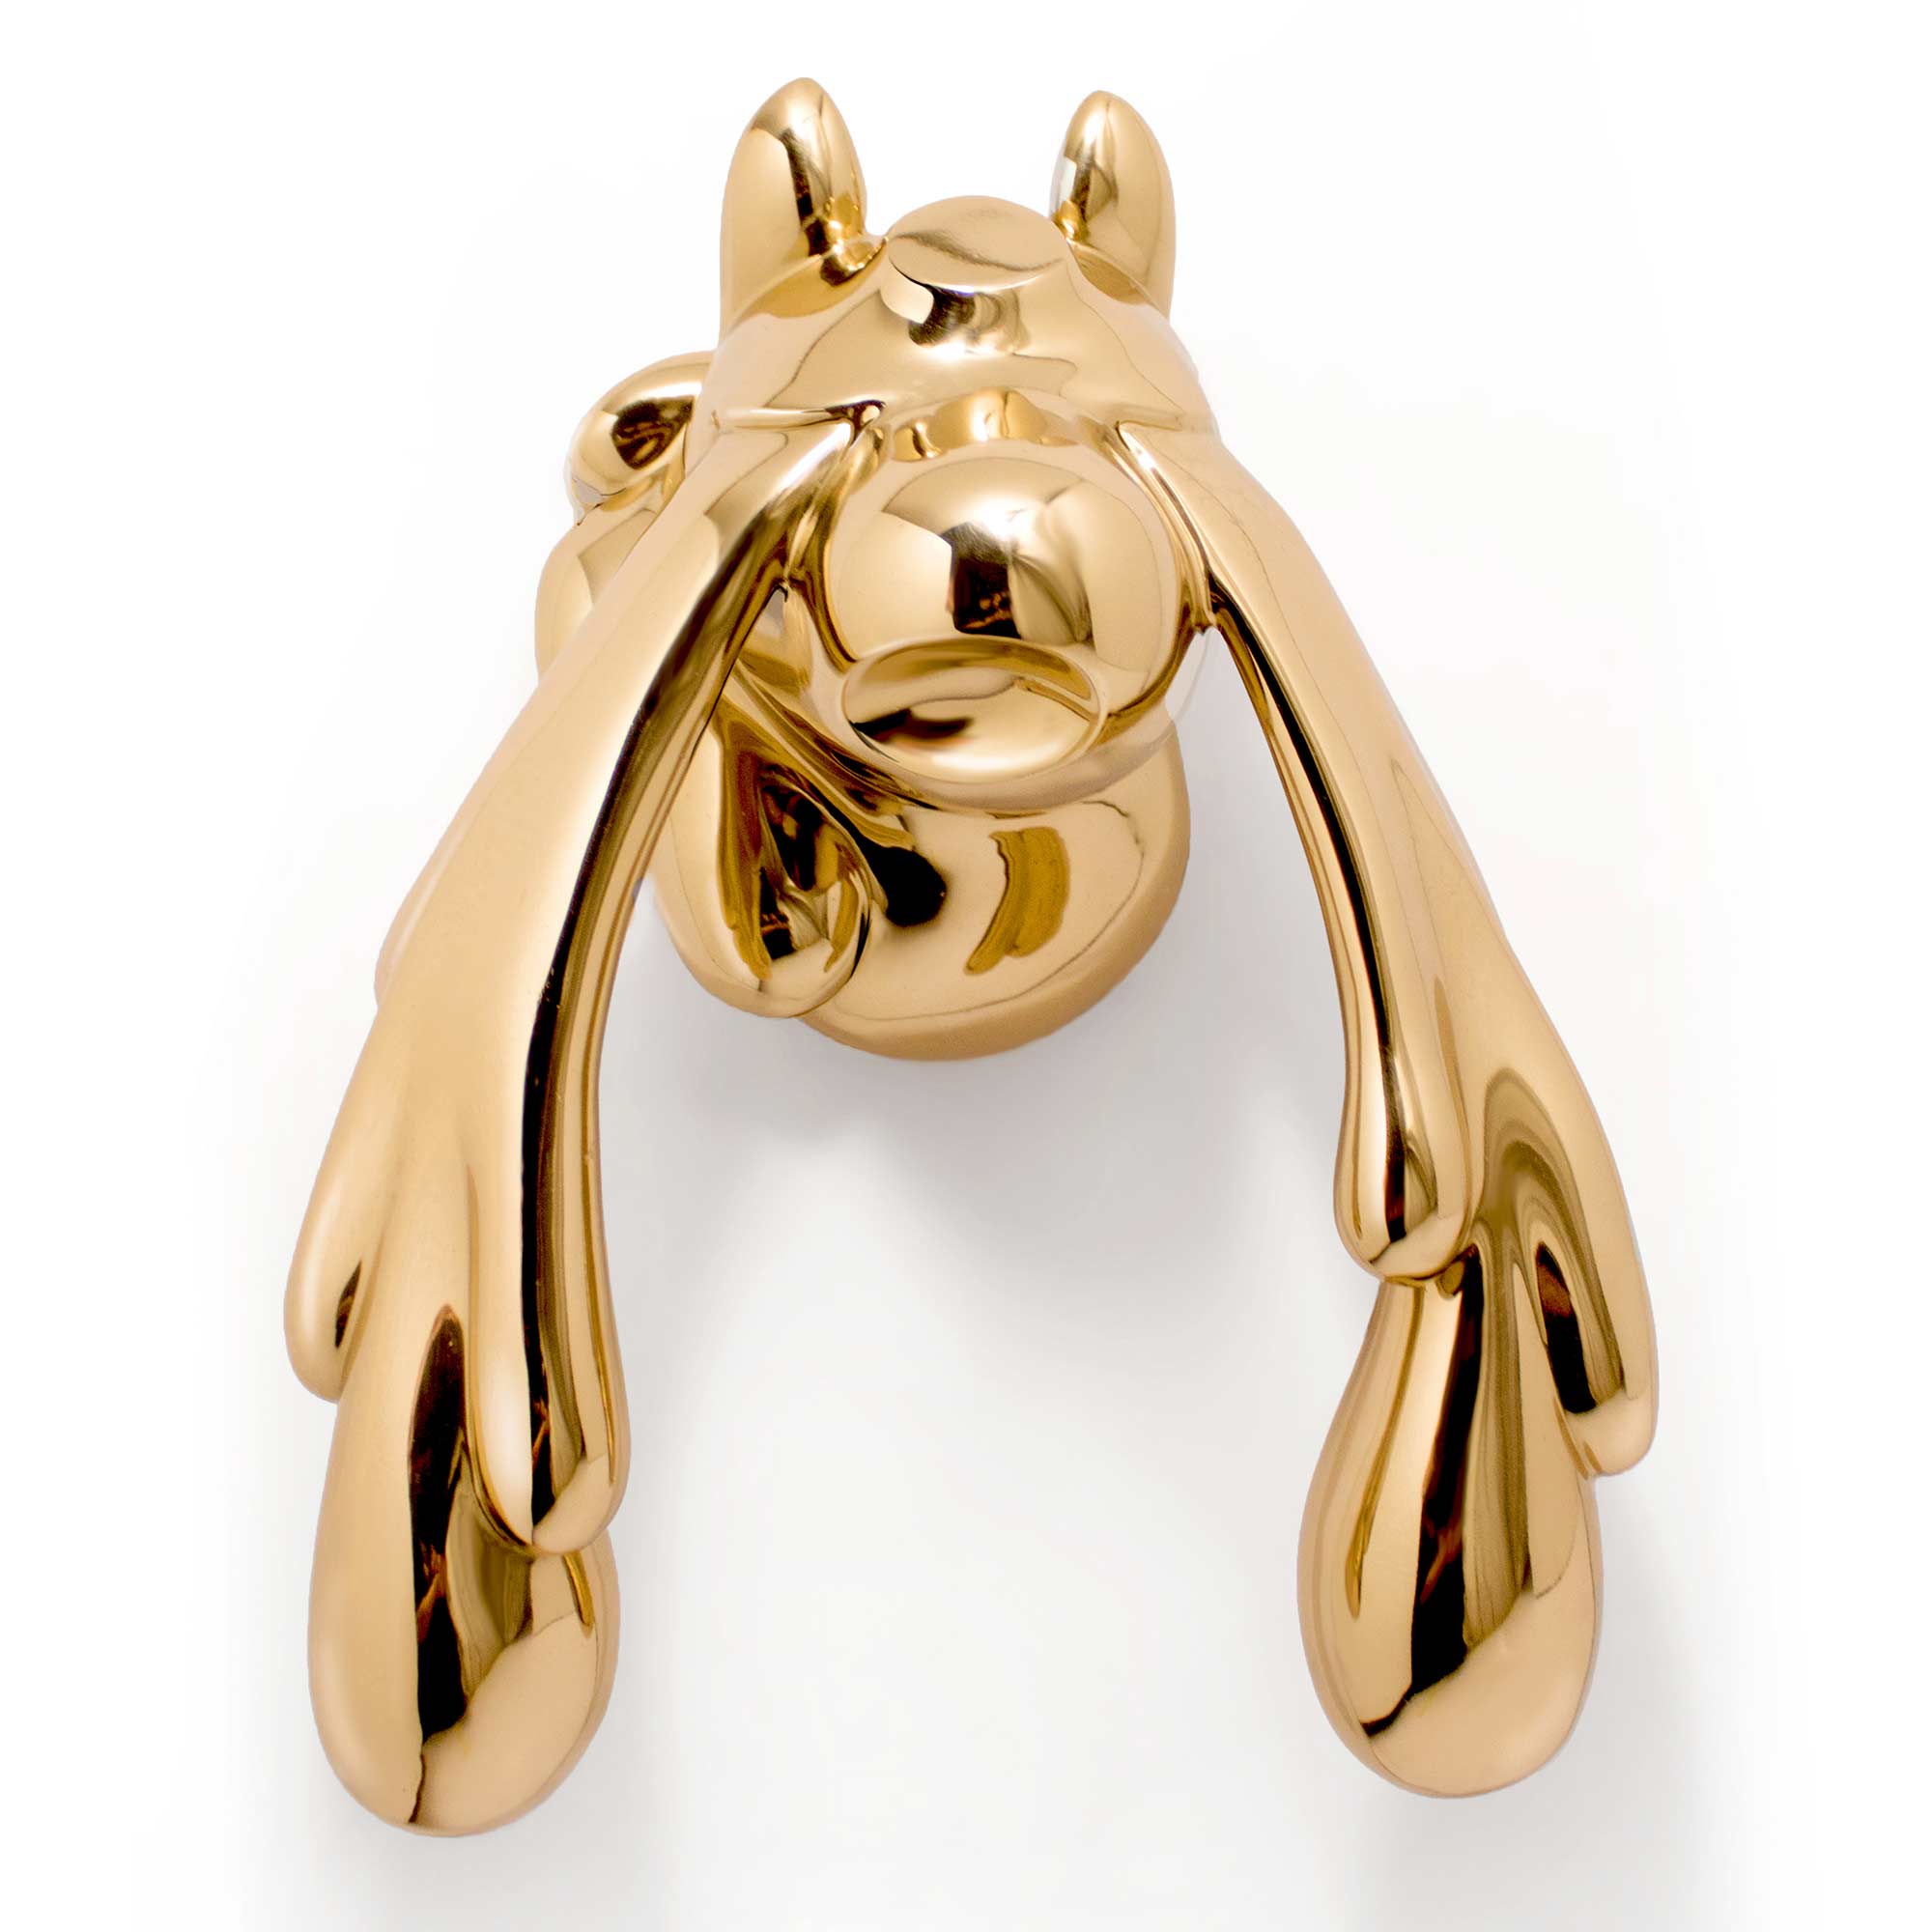 Unicorn Tears , crying unicorn horse character sculpture, Mirror Polished bronze sculpture, by artist Ferdi B Dick, front view